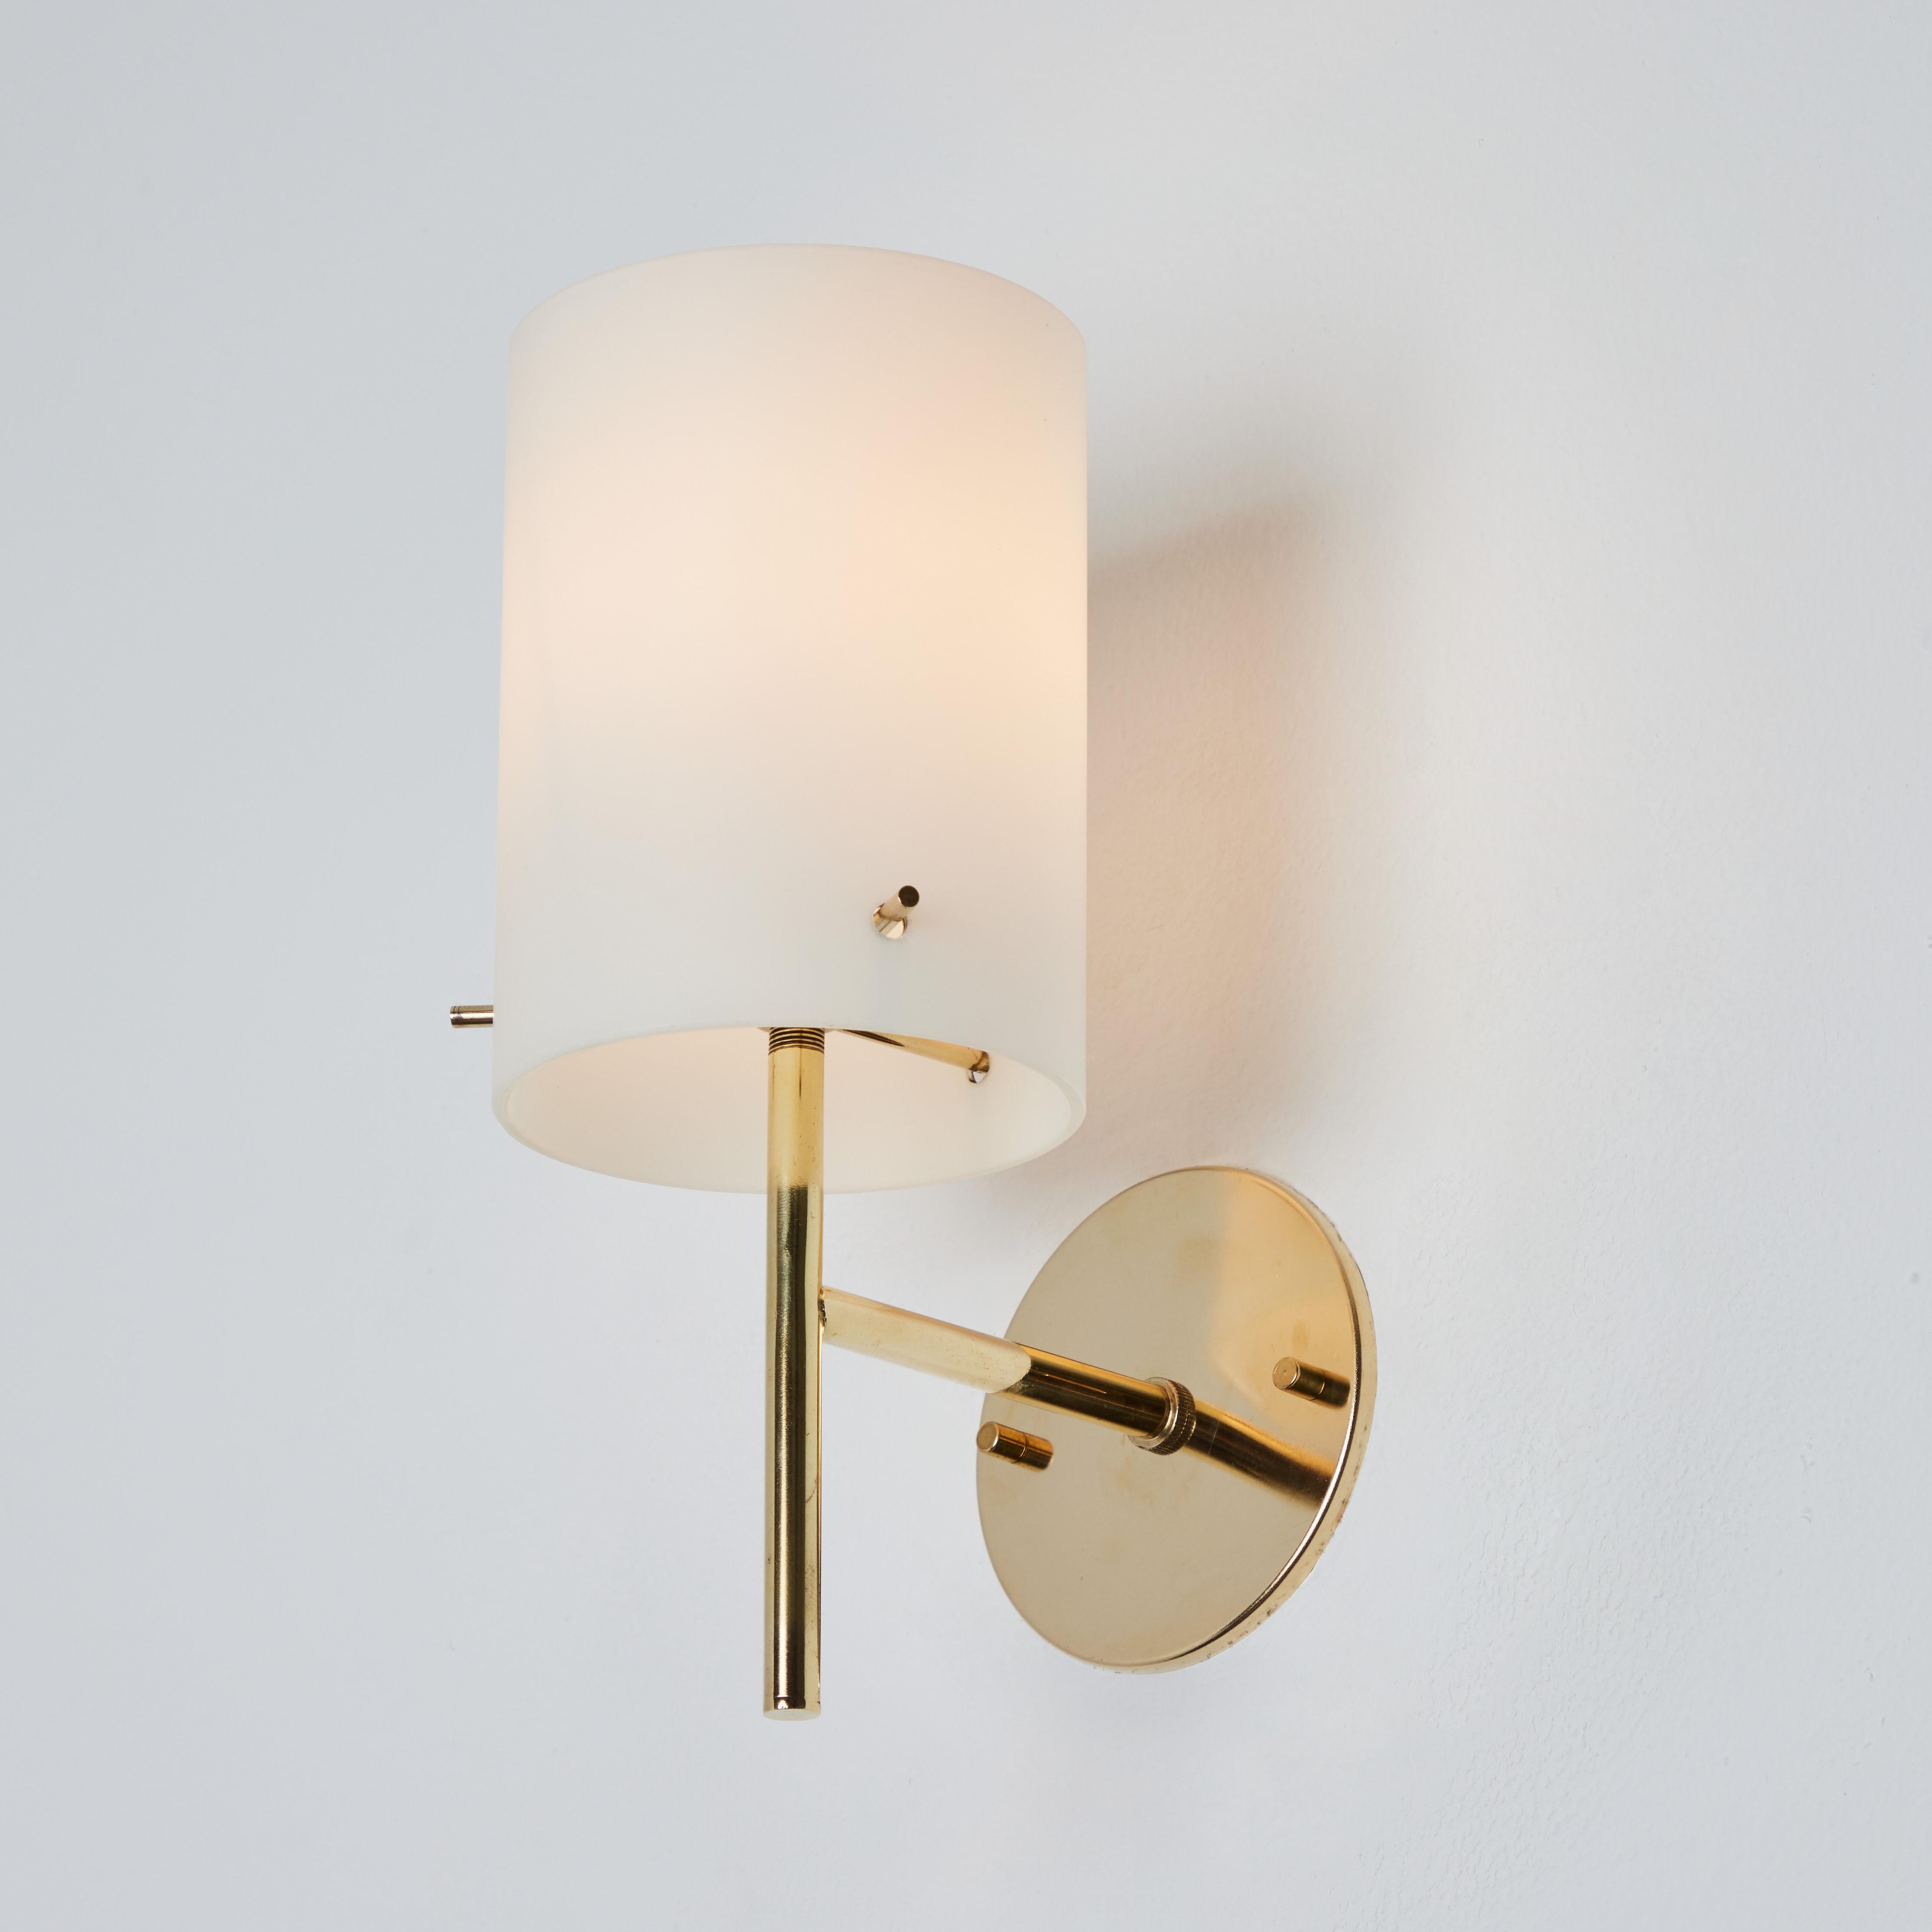 Italian 1950s Tito Agnoli Brass & Glass Cylindrical Wall Lamp for O-Luce For Sale